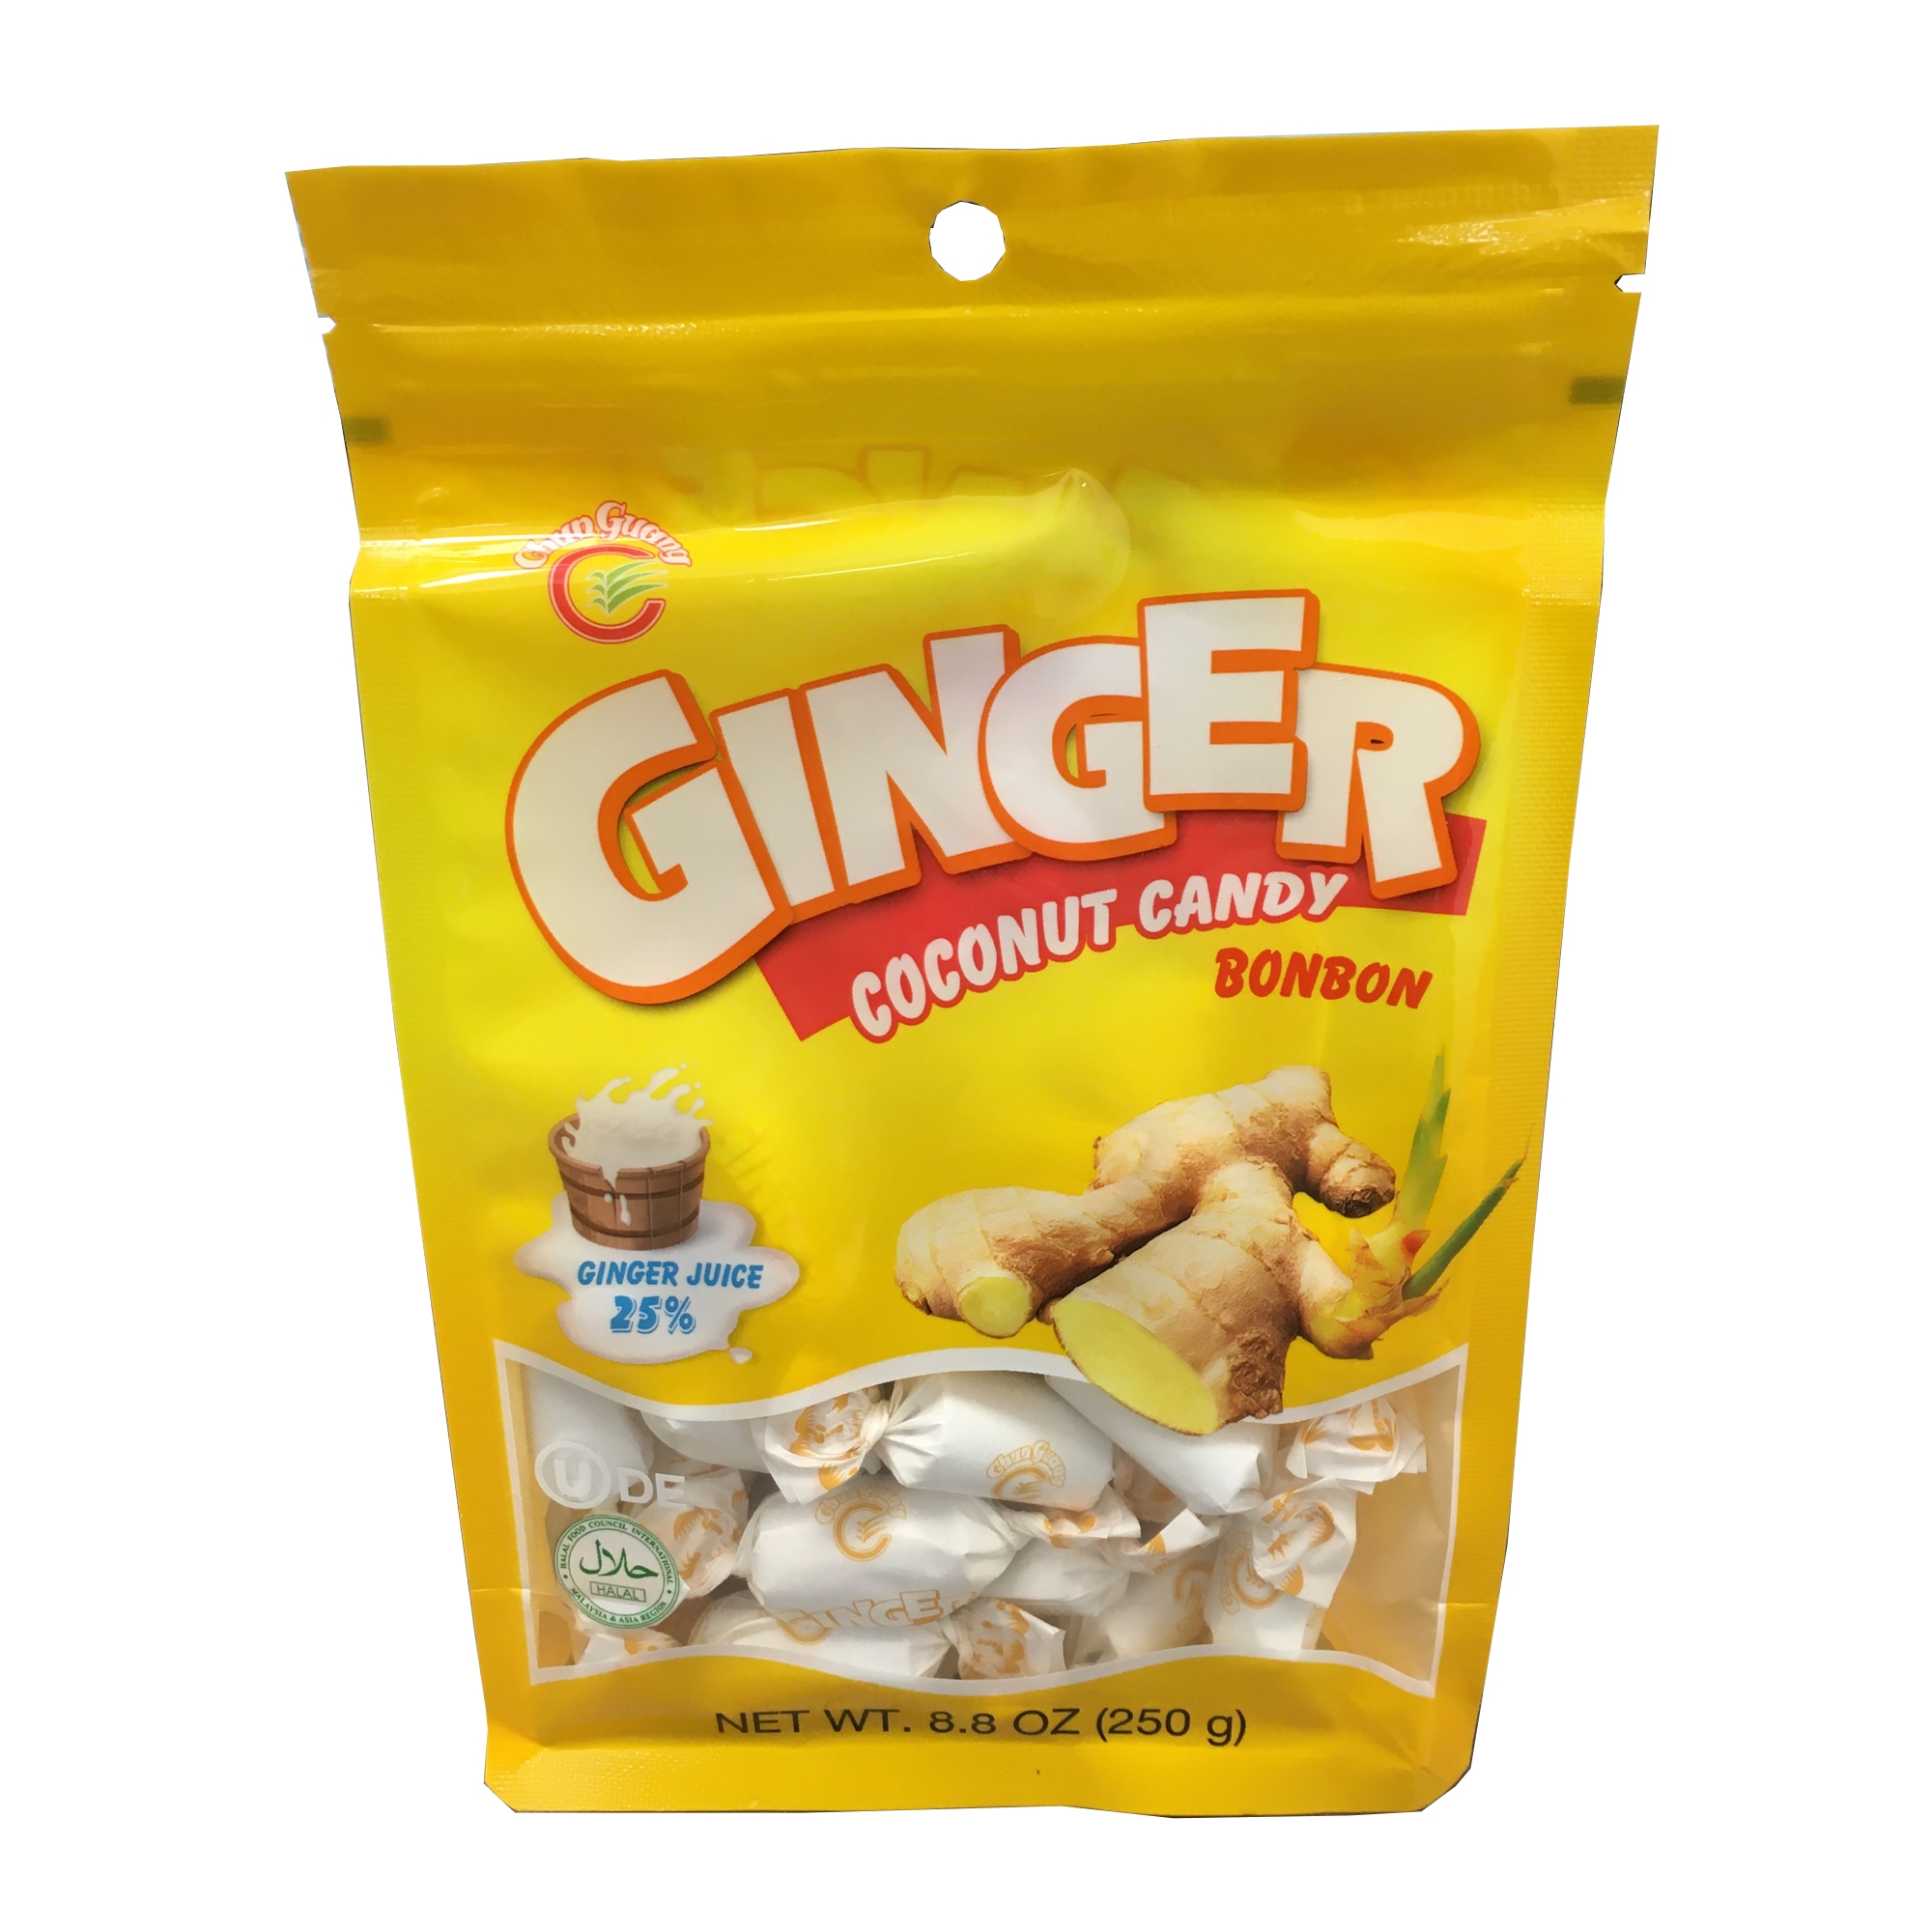 CG GINGER COCONUT CANDY SN130062